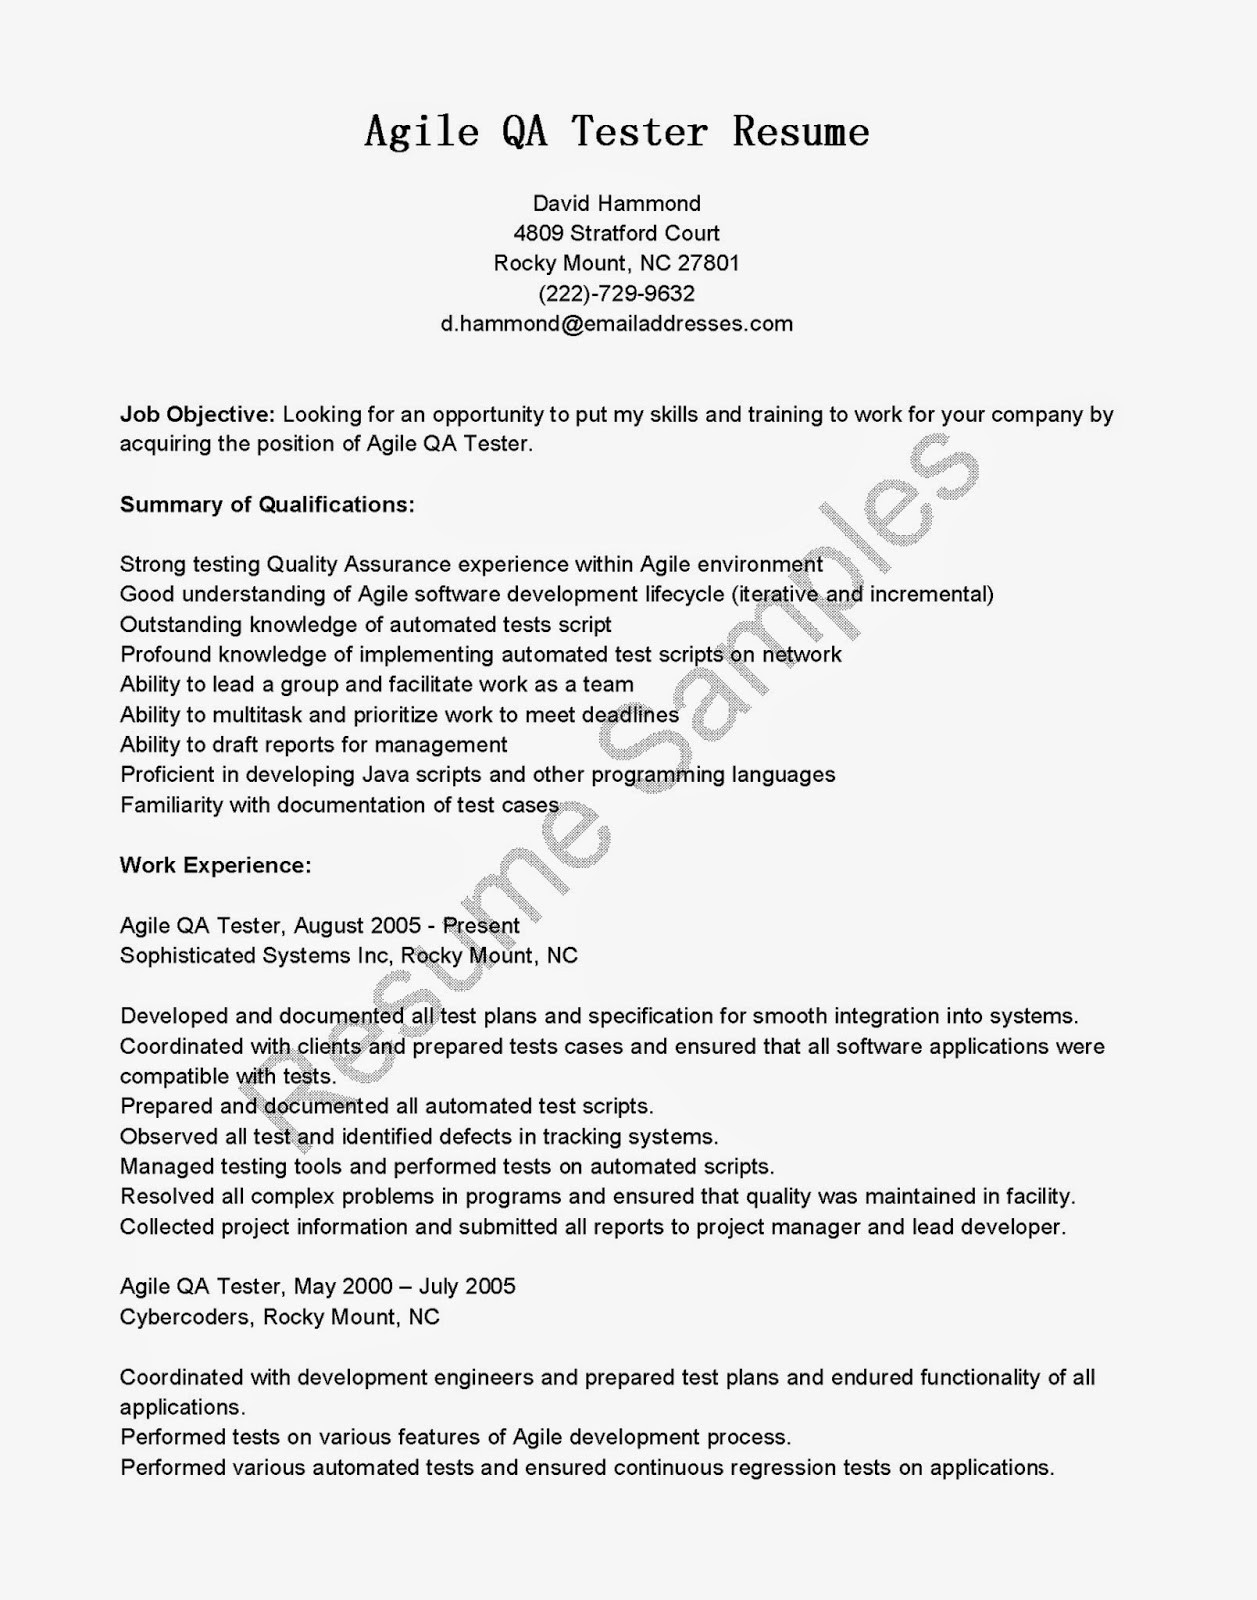 Sample Resume with Agile Experience for Testing Agile software Tester Resume October 2021